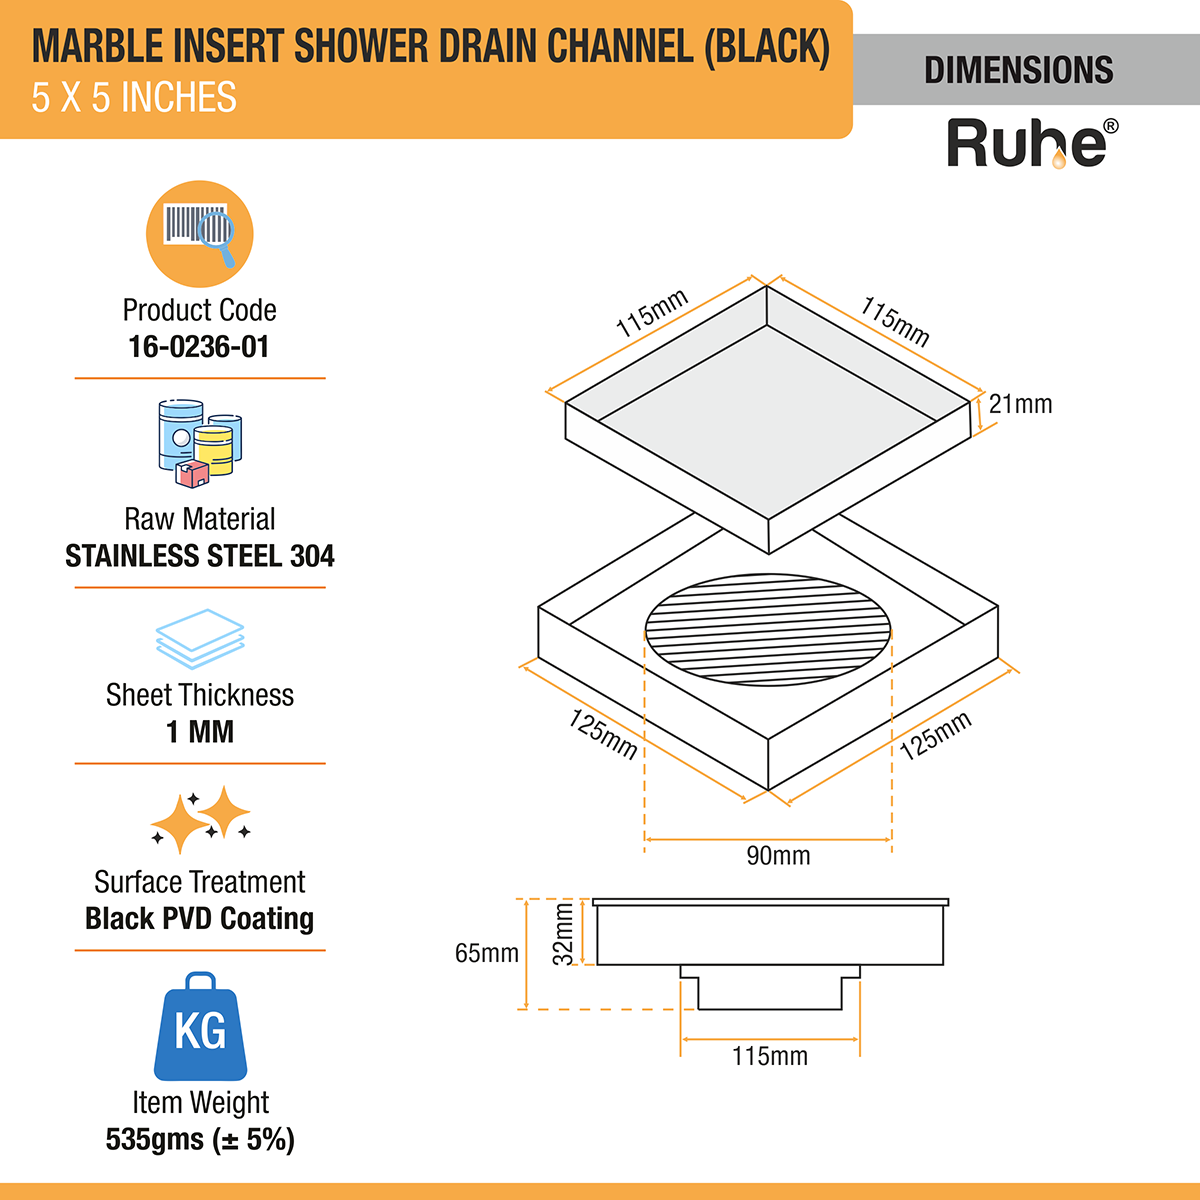 Marble Insert Shower Drain Channel (5 x 5 Inches) Black PVD Coated dimensions and sizes